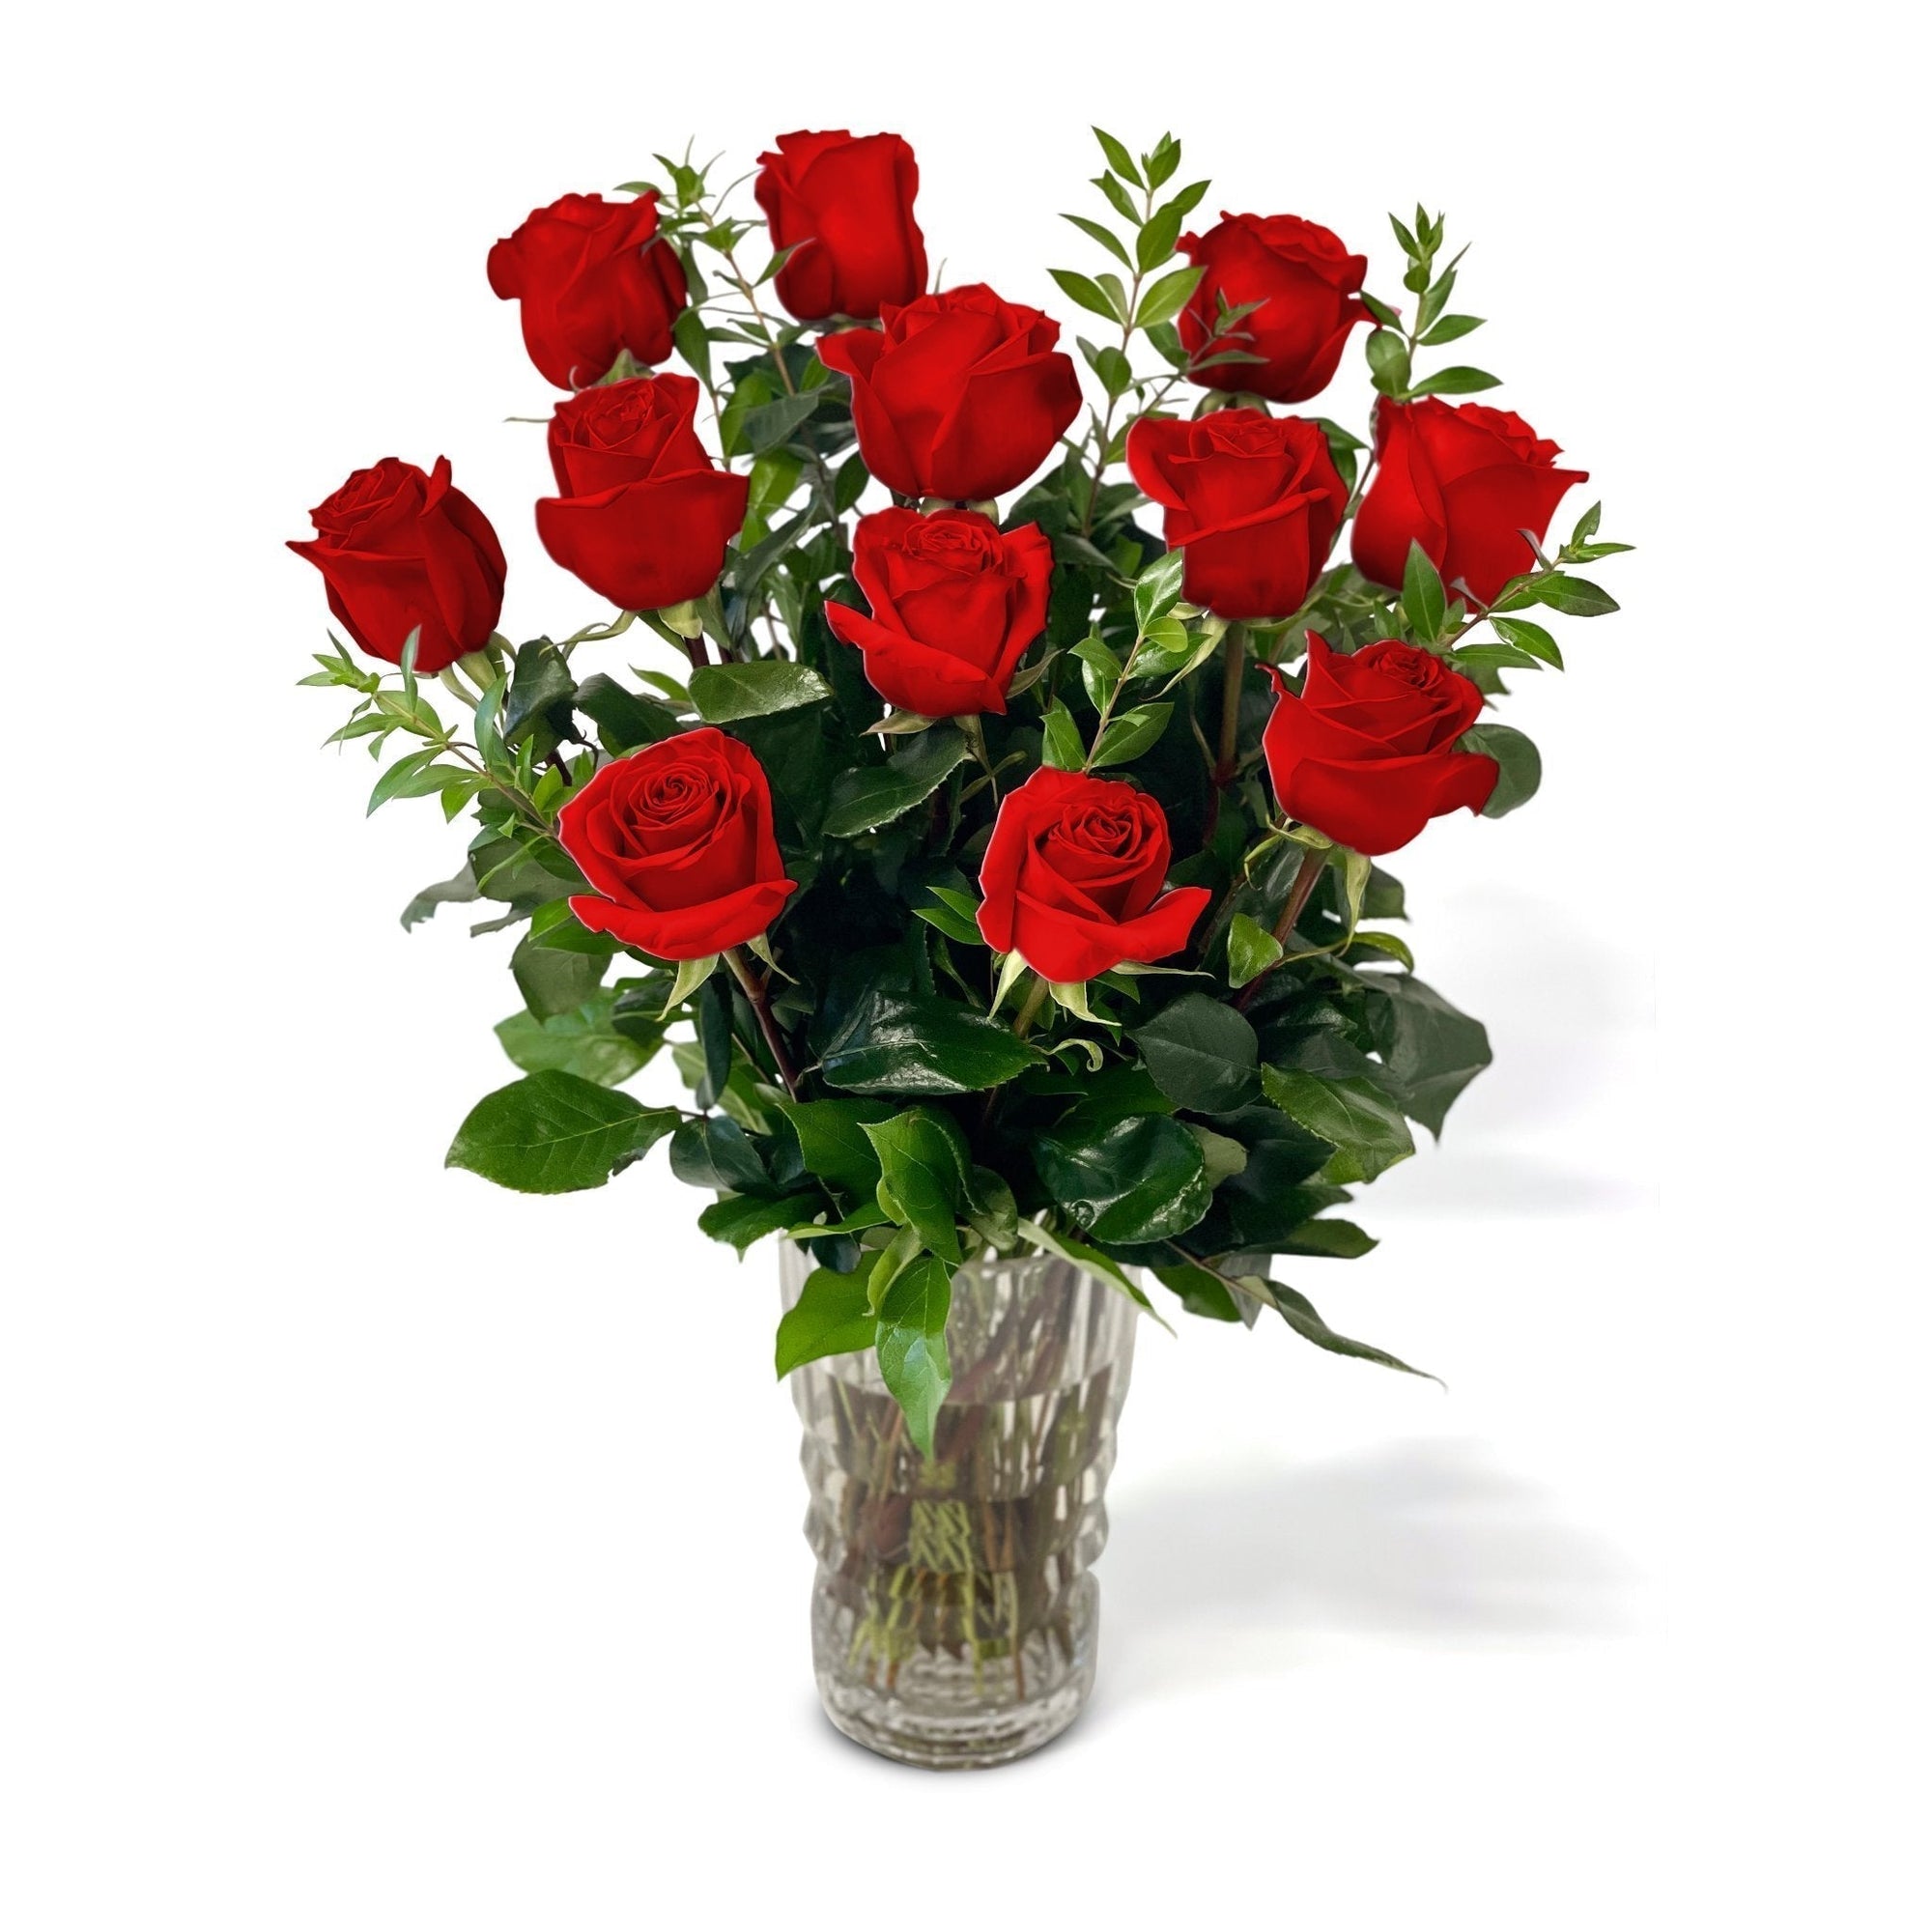 Queens Flower Delivery - Fresh Roses in a Crystal Vase | Dozen Red